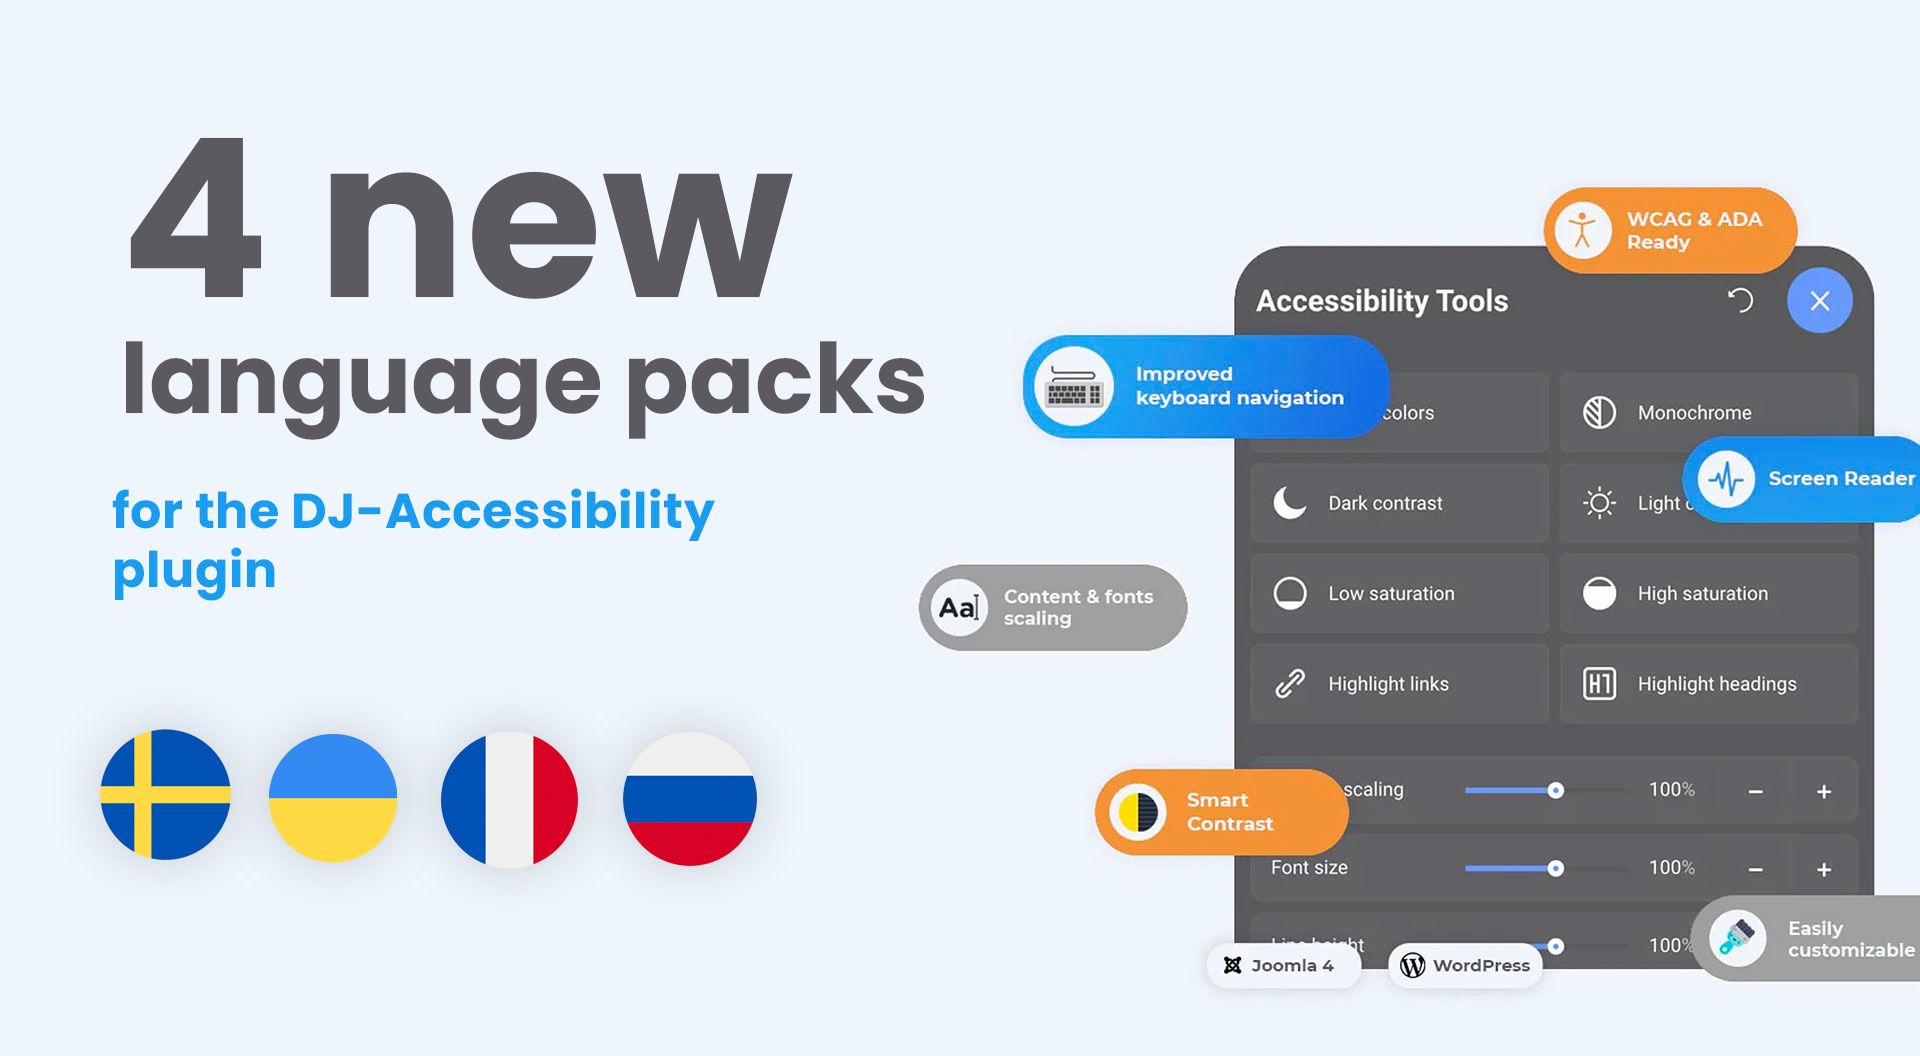 4 new language packs for the DJ-Accessibility plugin